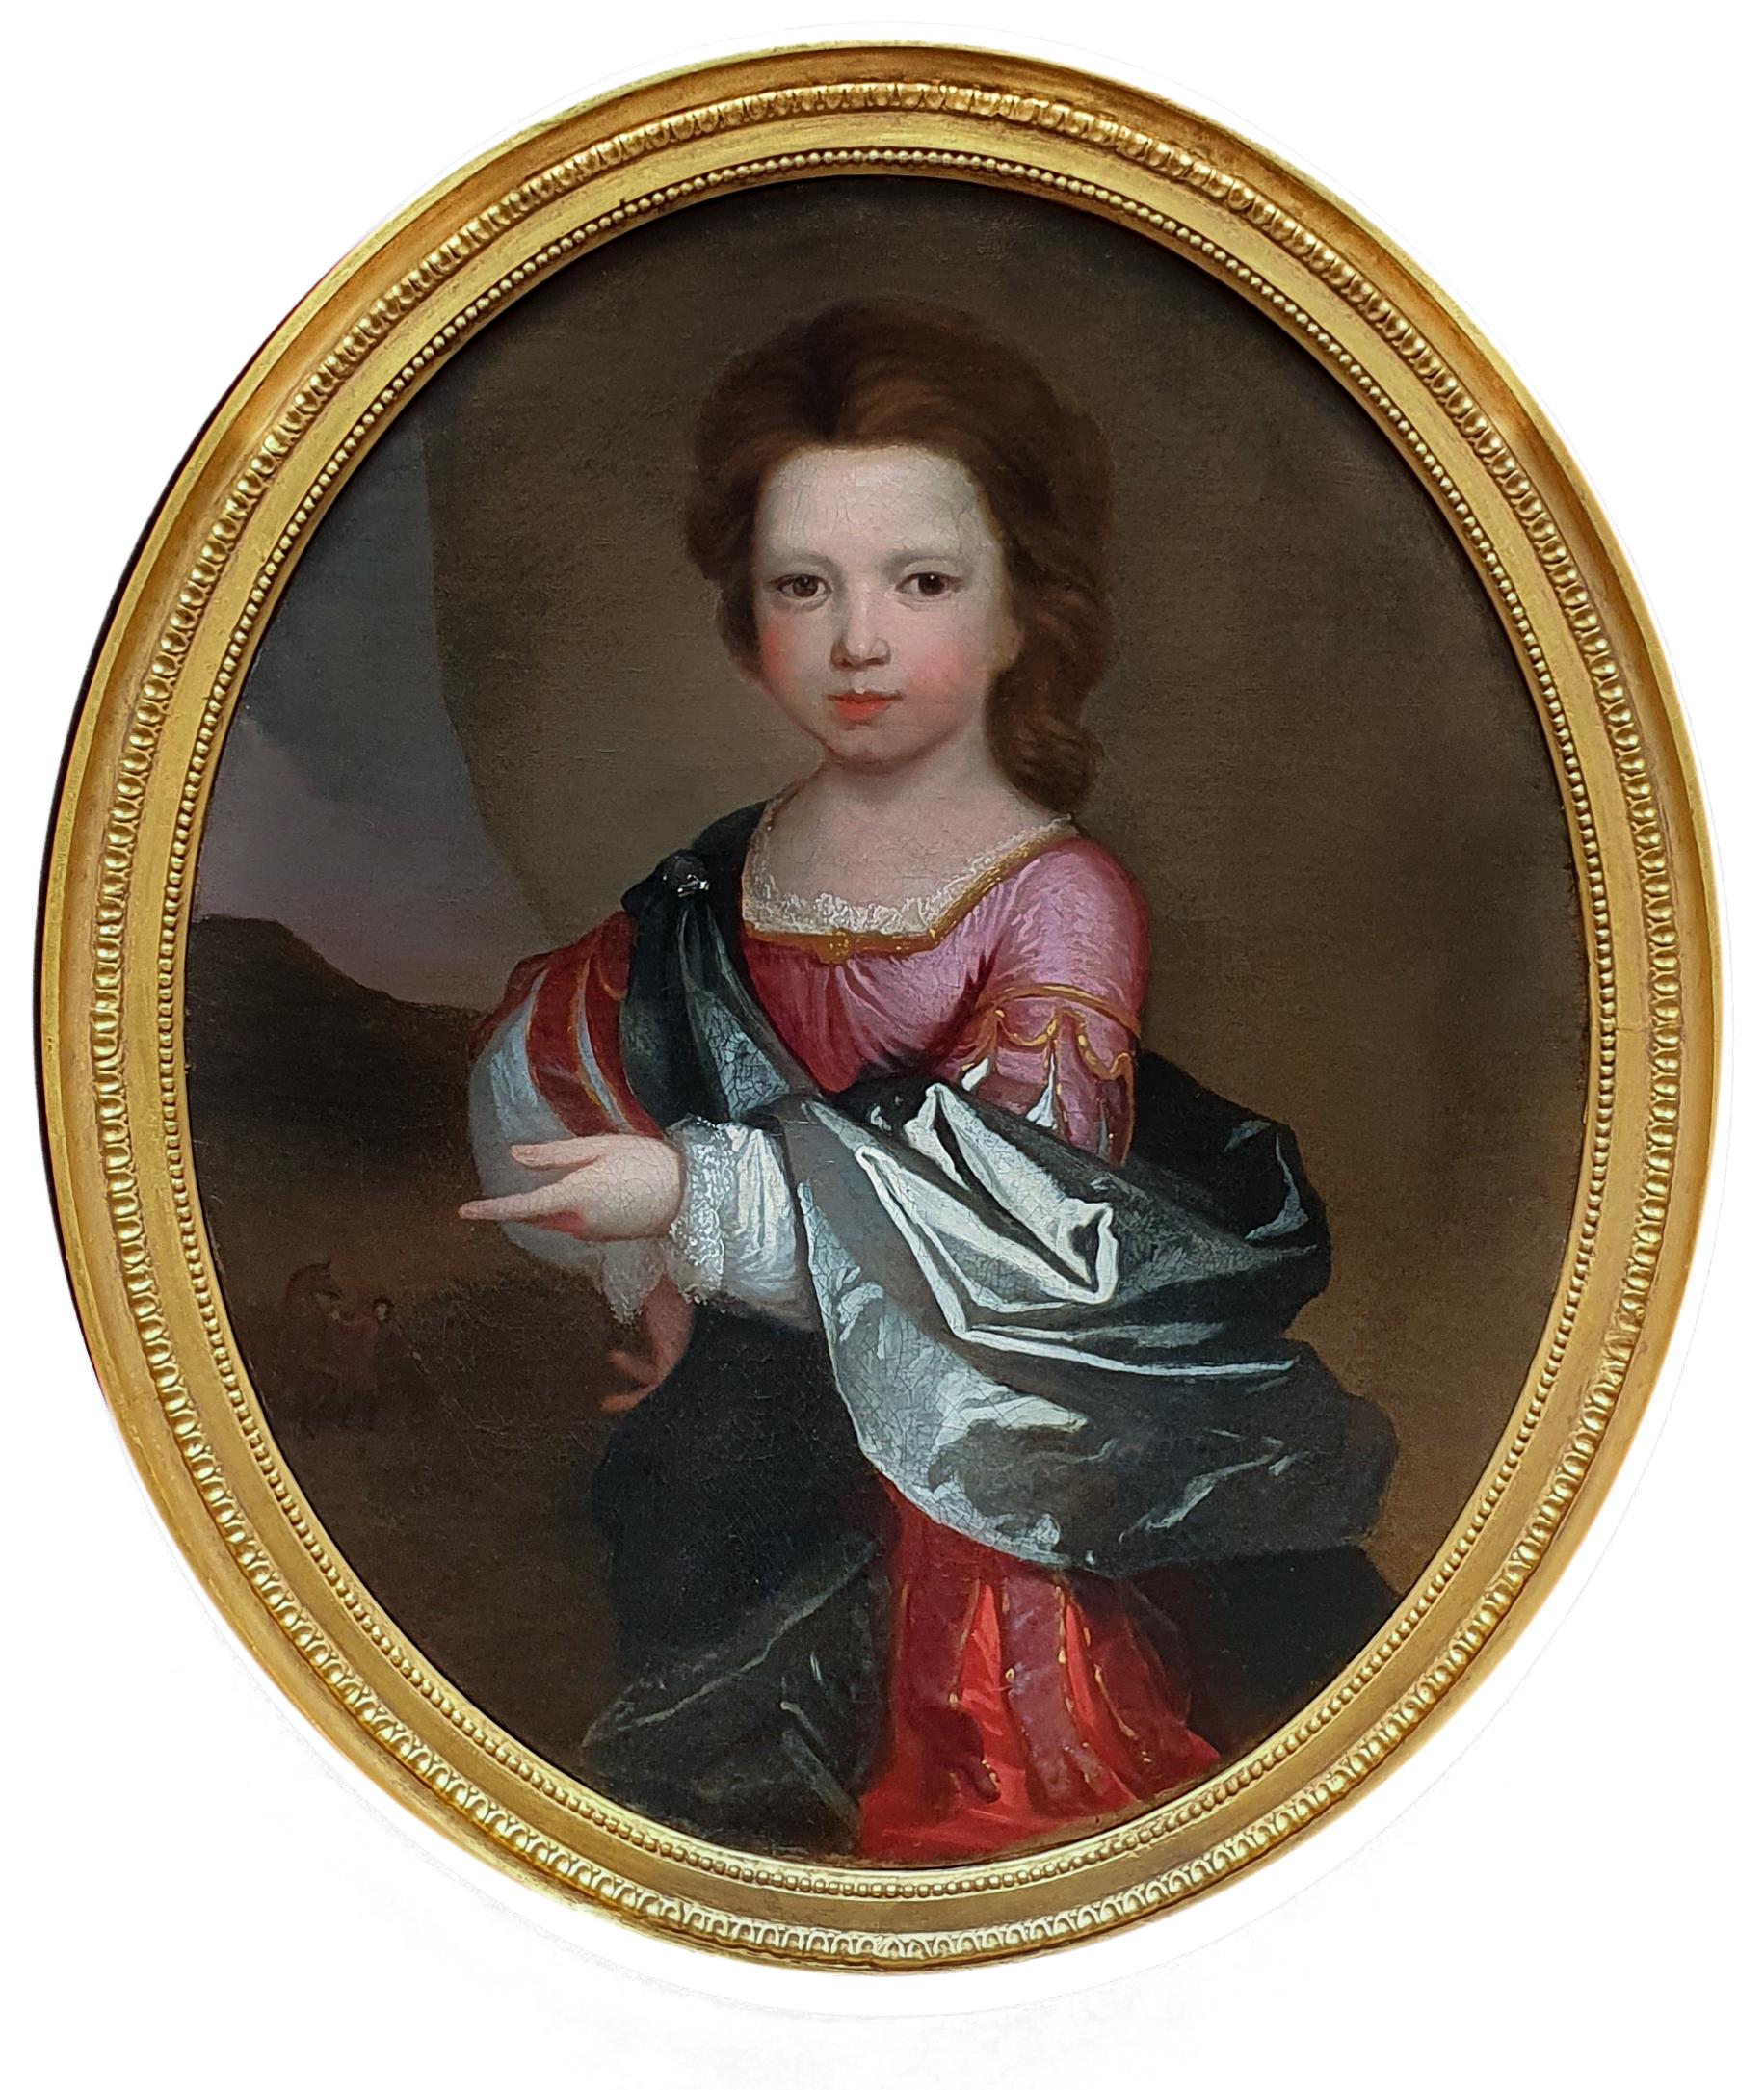 (Attributed to) Edward Byng Portrait Painting - PORTRAIT of a Young Girl in Roman Dress c.1695, Antique Oil Painting EDWARD BYNG